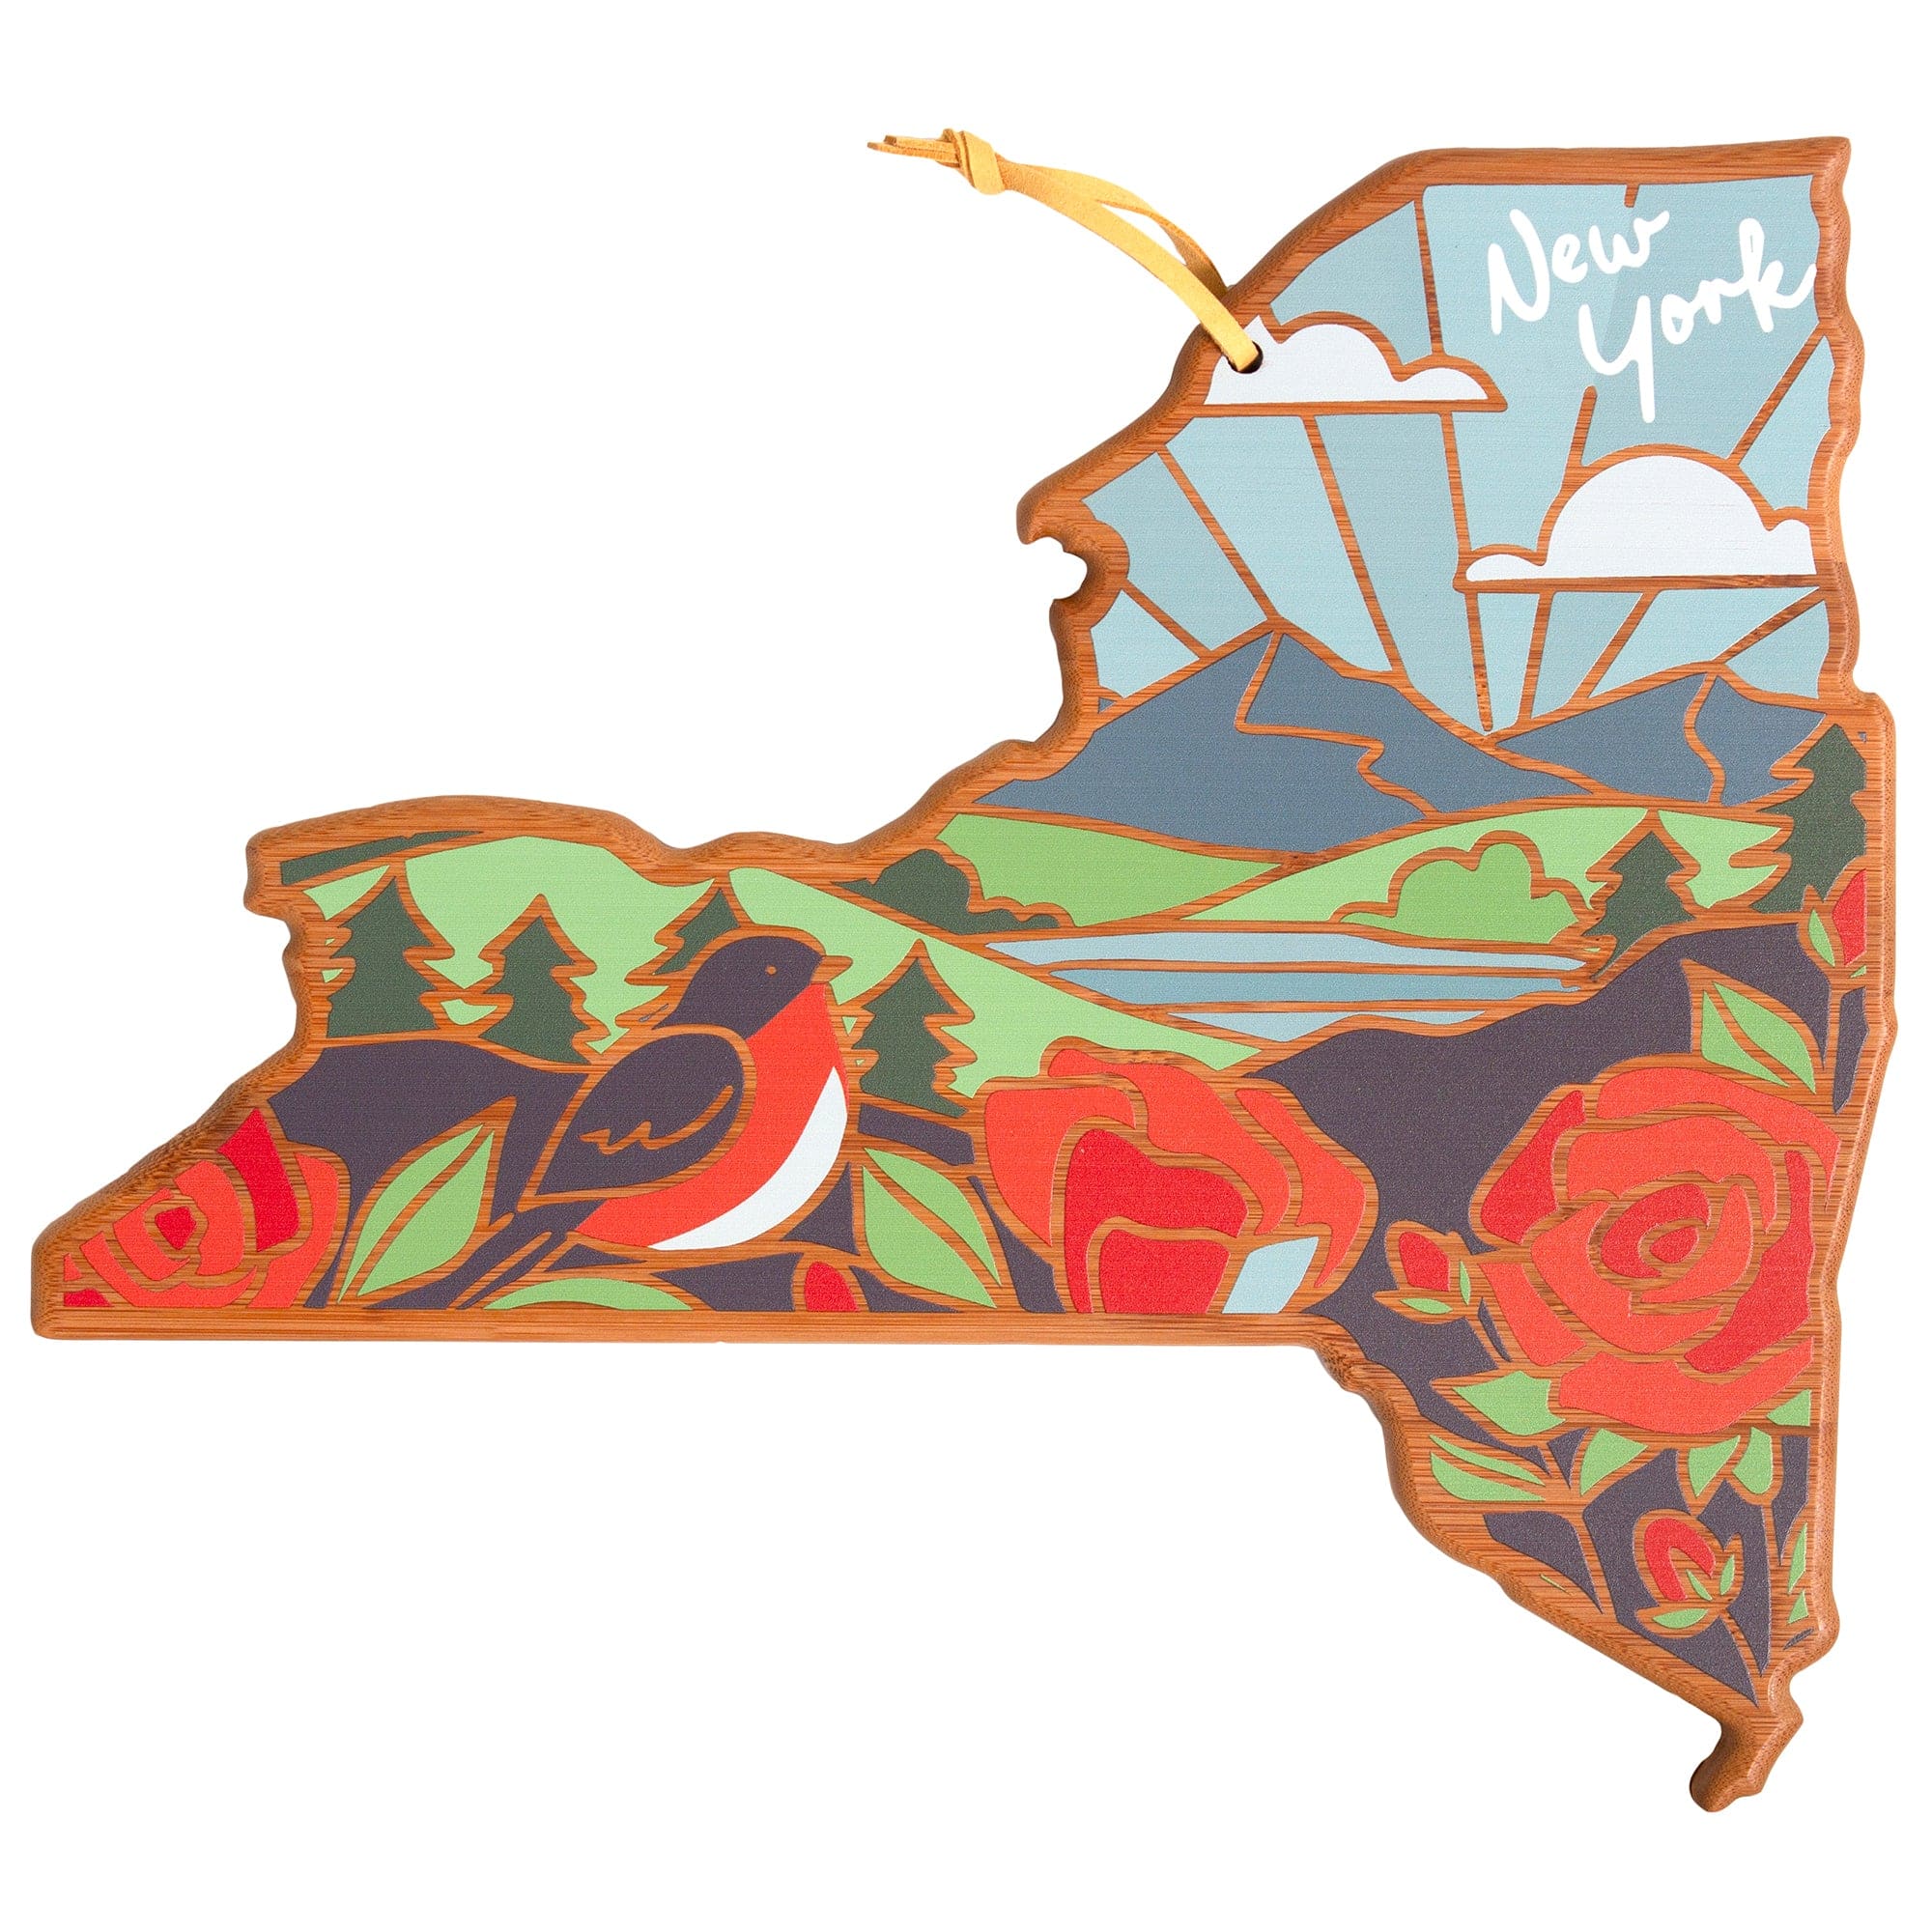 Totally Bamboo New York State Shaped Serving and Cutting Board with Artwork by Summer Stokes